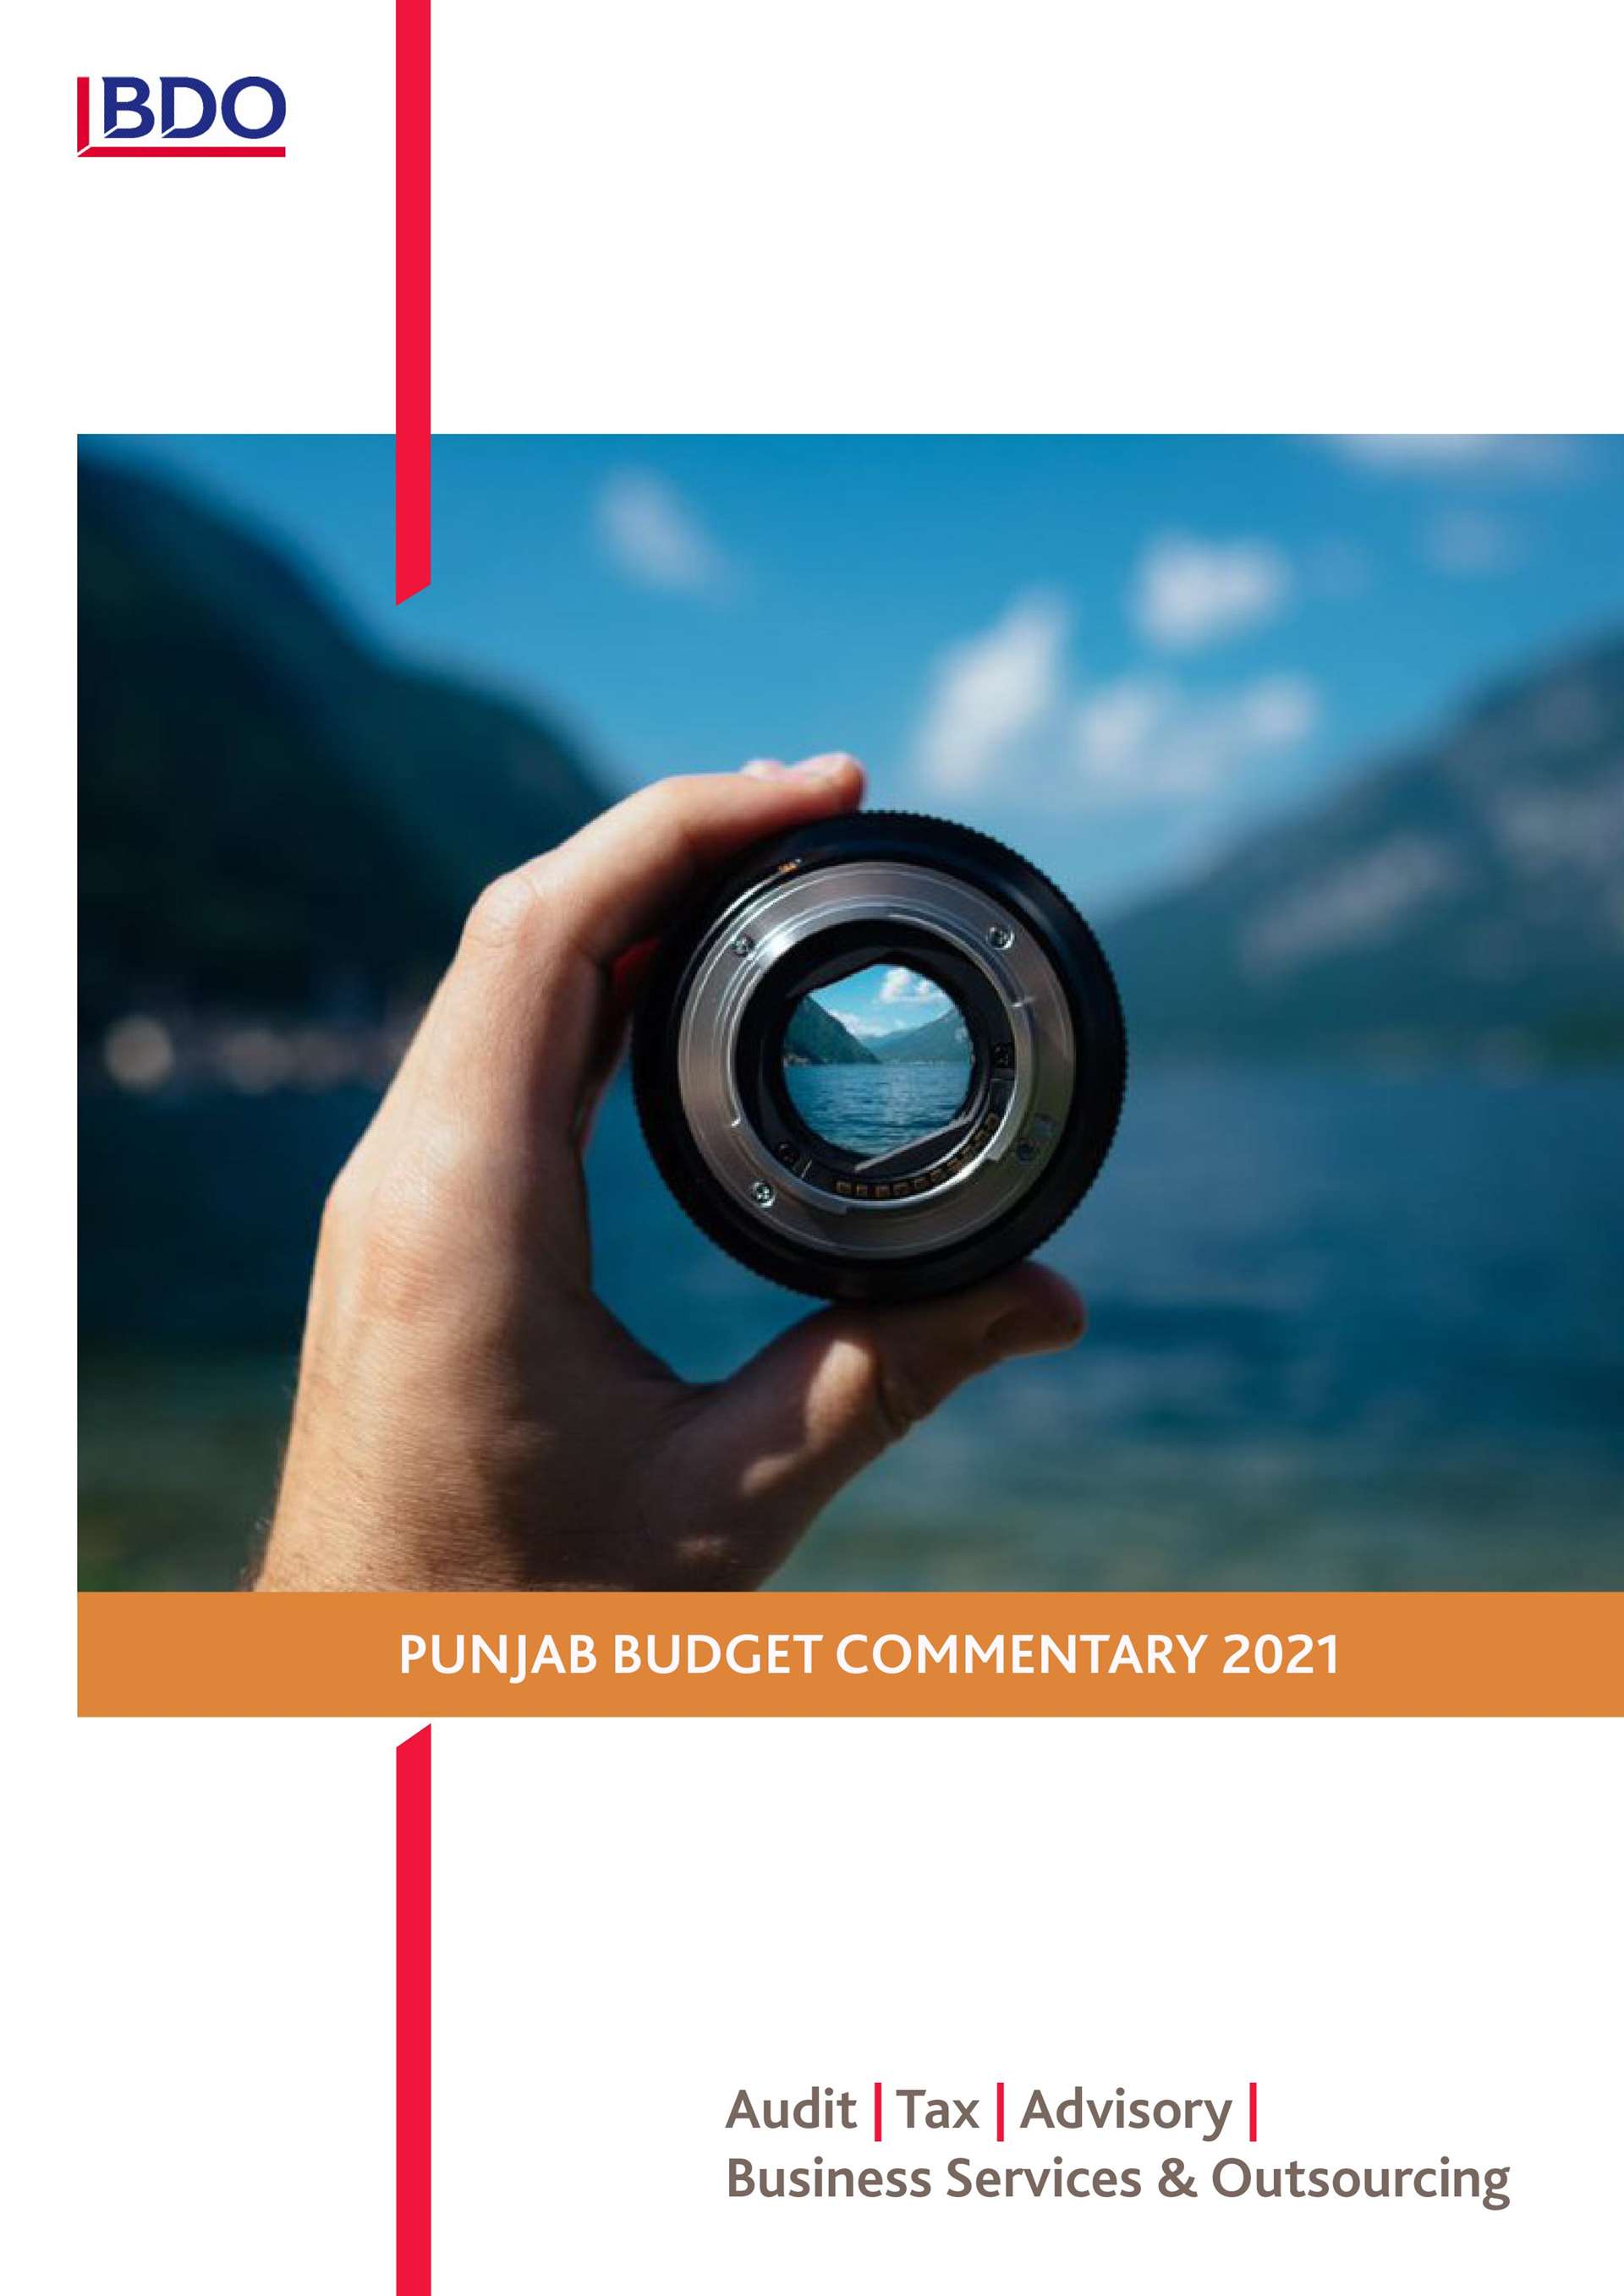 PUNJAB BUDGET COMMENTARY 2021